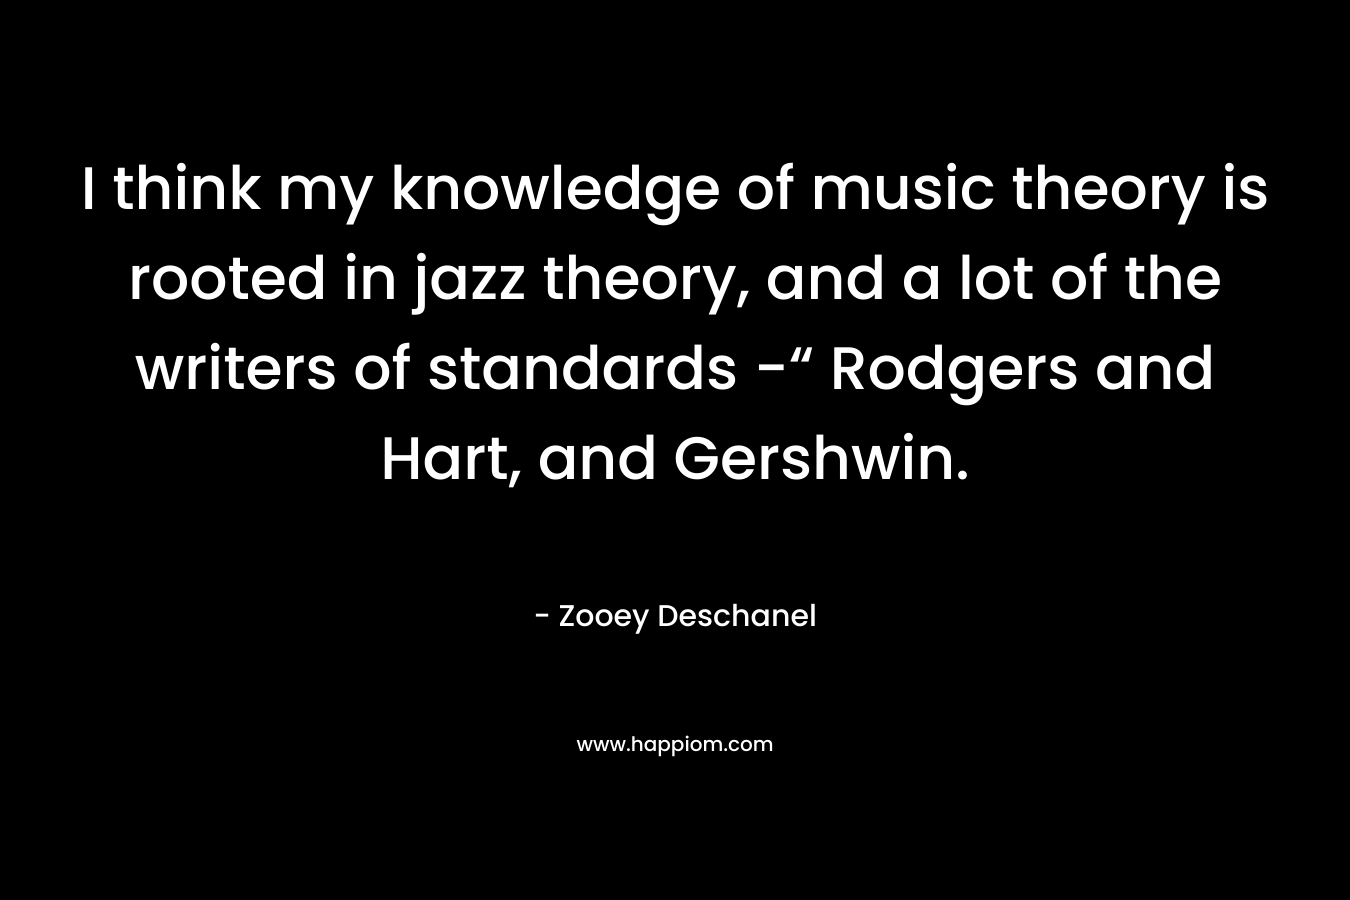 I think my knowledge of music theory is rooted in jazz theory, and a lot of the writers of standards -“ Rodgers and Hart, and Gershwin.